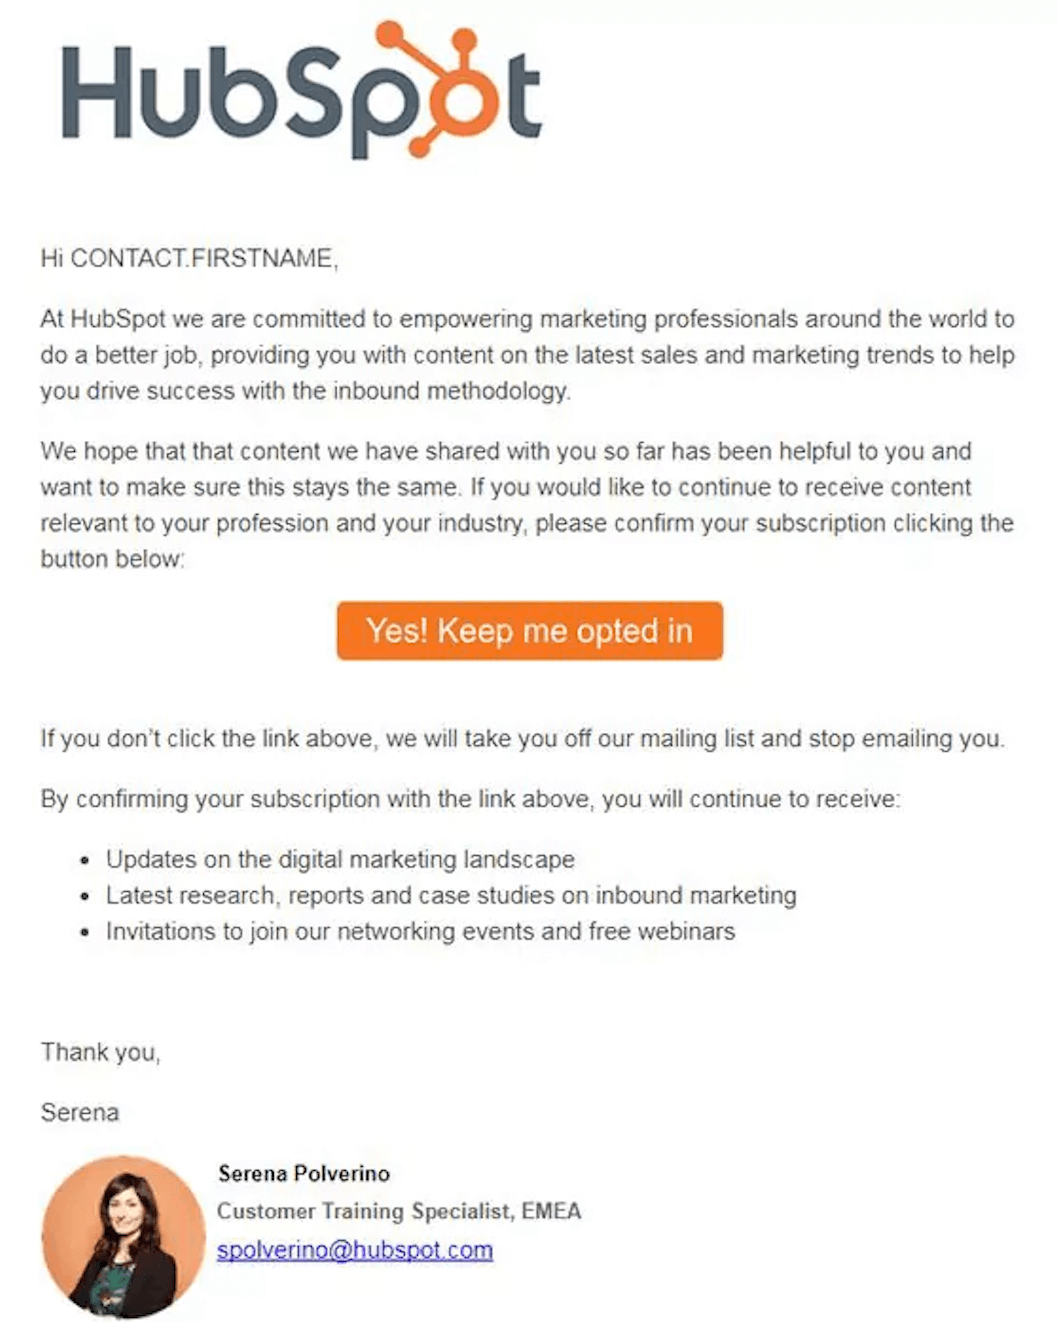 SaaS Re-engagement Emails: Screenshot of HubSpot's email